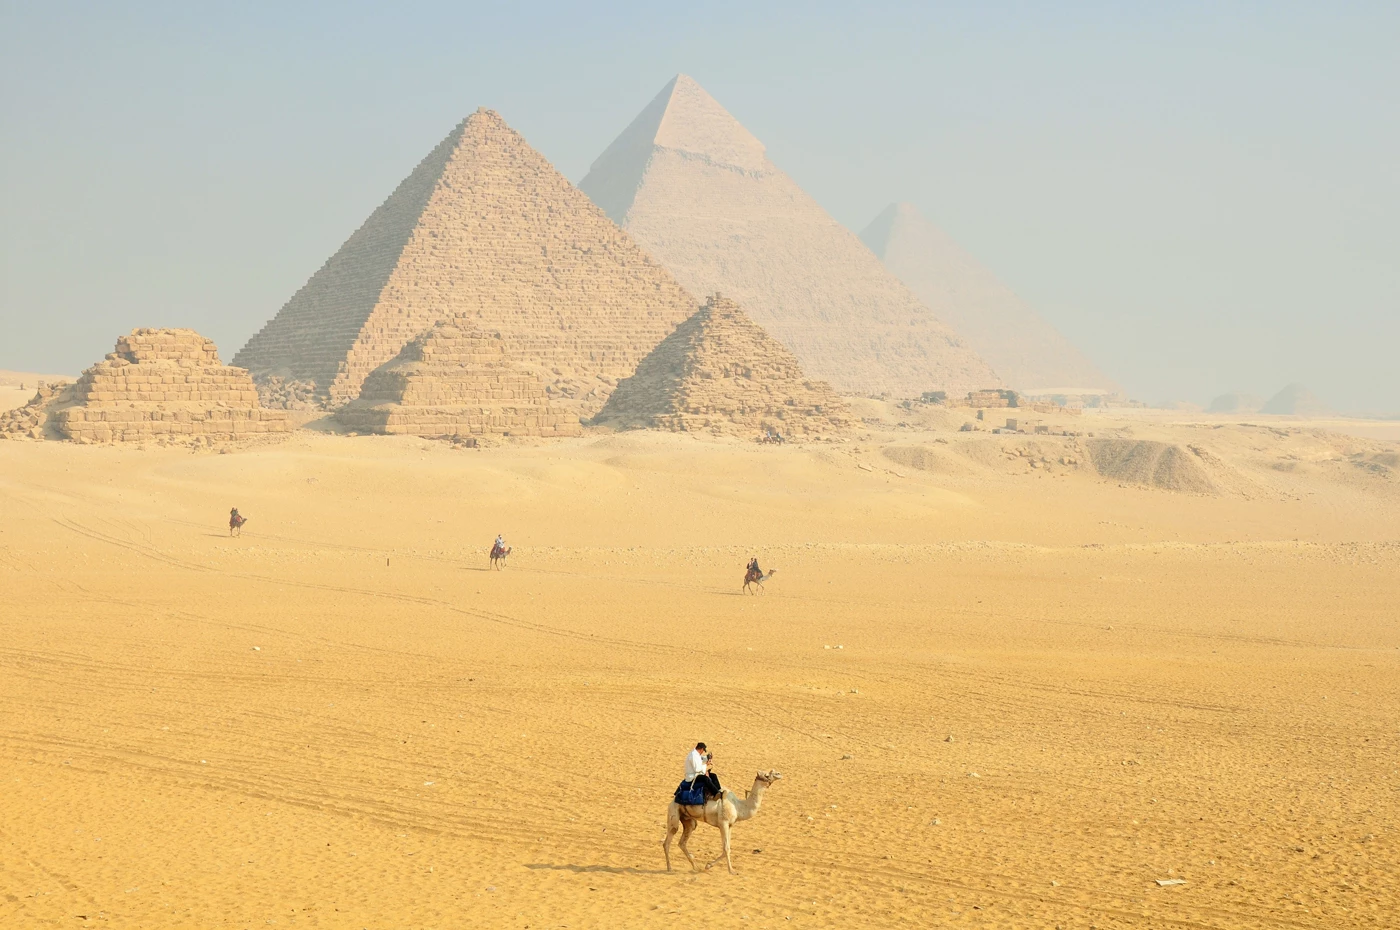 The Pyramids of Giza in the distance with a man on a camel walking across the desert towards them 